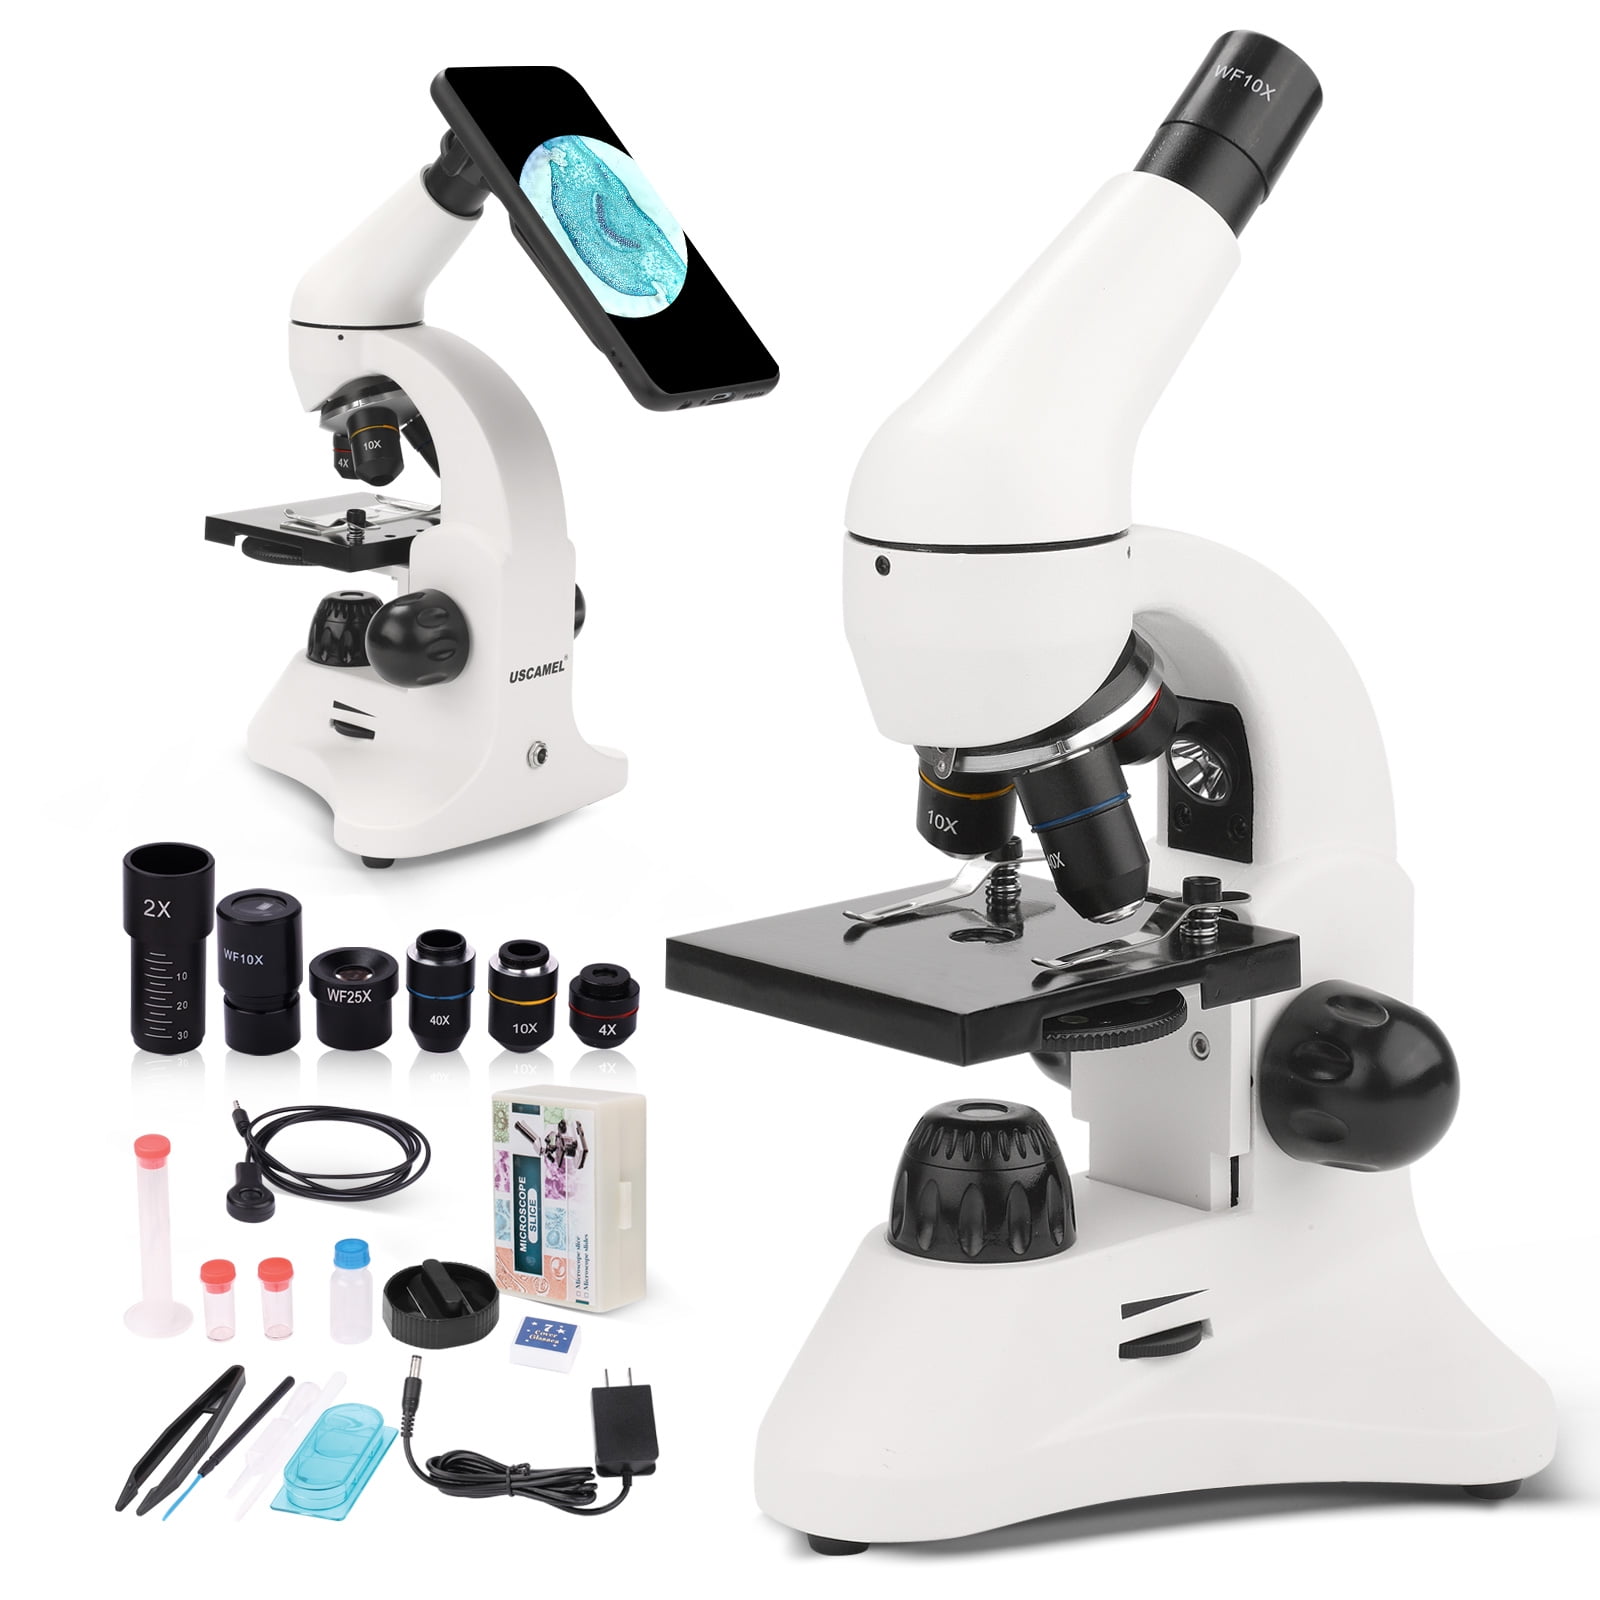 Cassini #C-1200M 98pc Microscope Kit with sturdy storage case & Projection Hood 